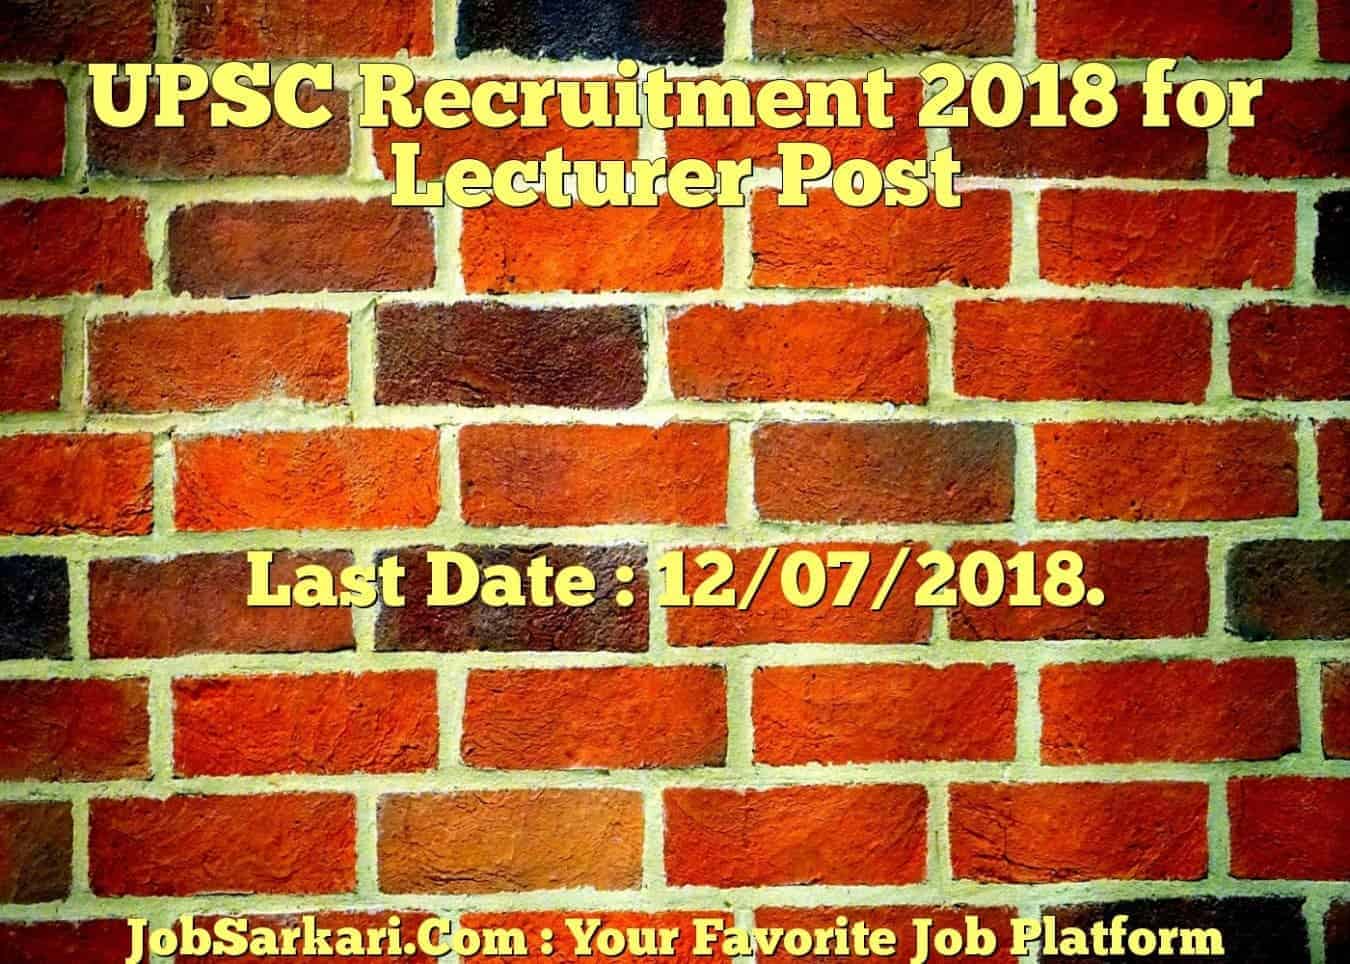 UPSC Recruitment 2018 for Lecturer Post